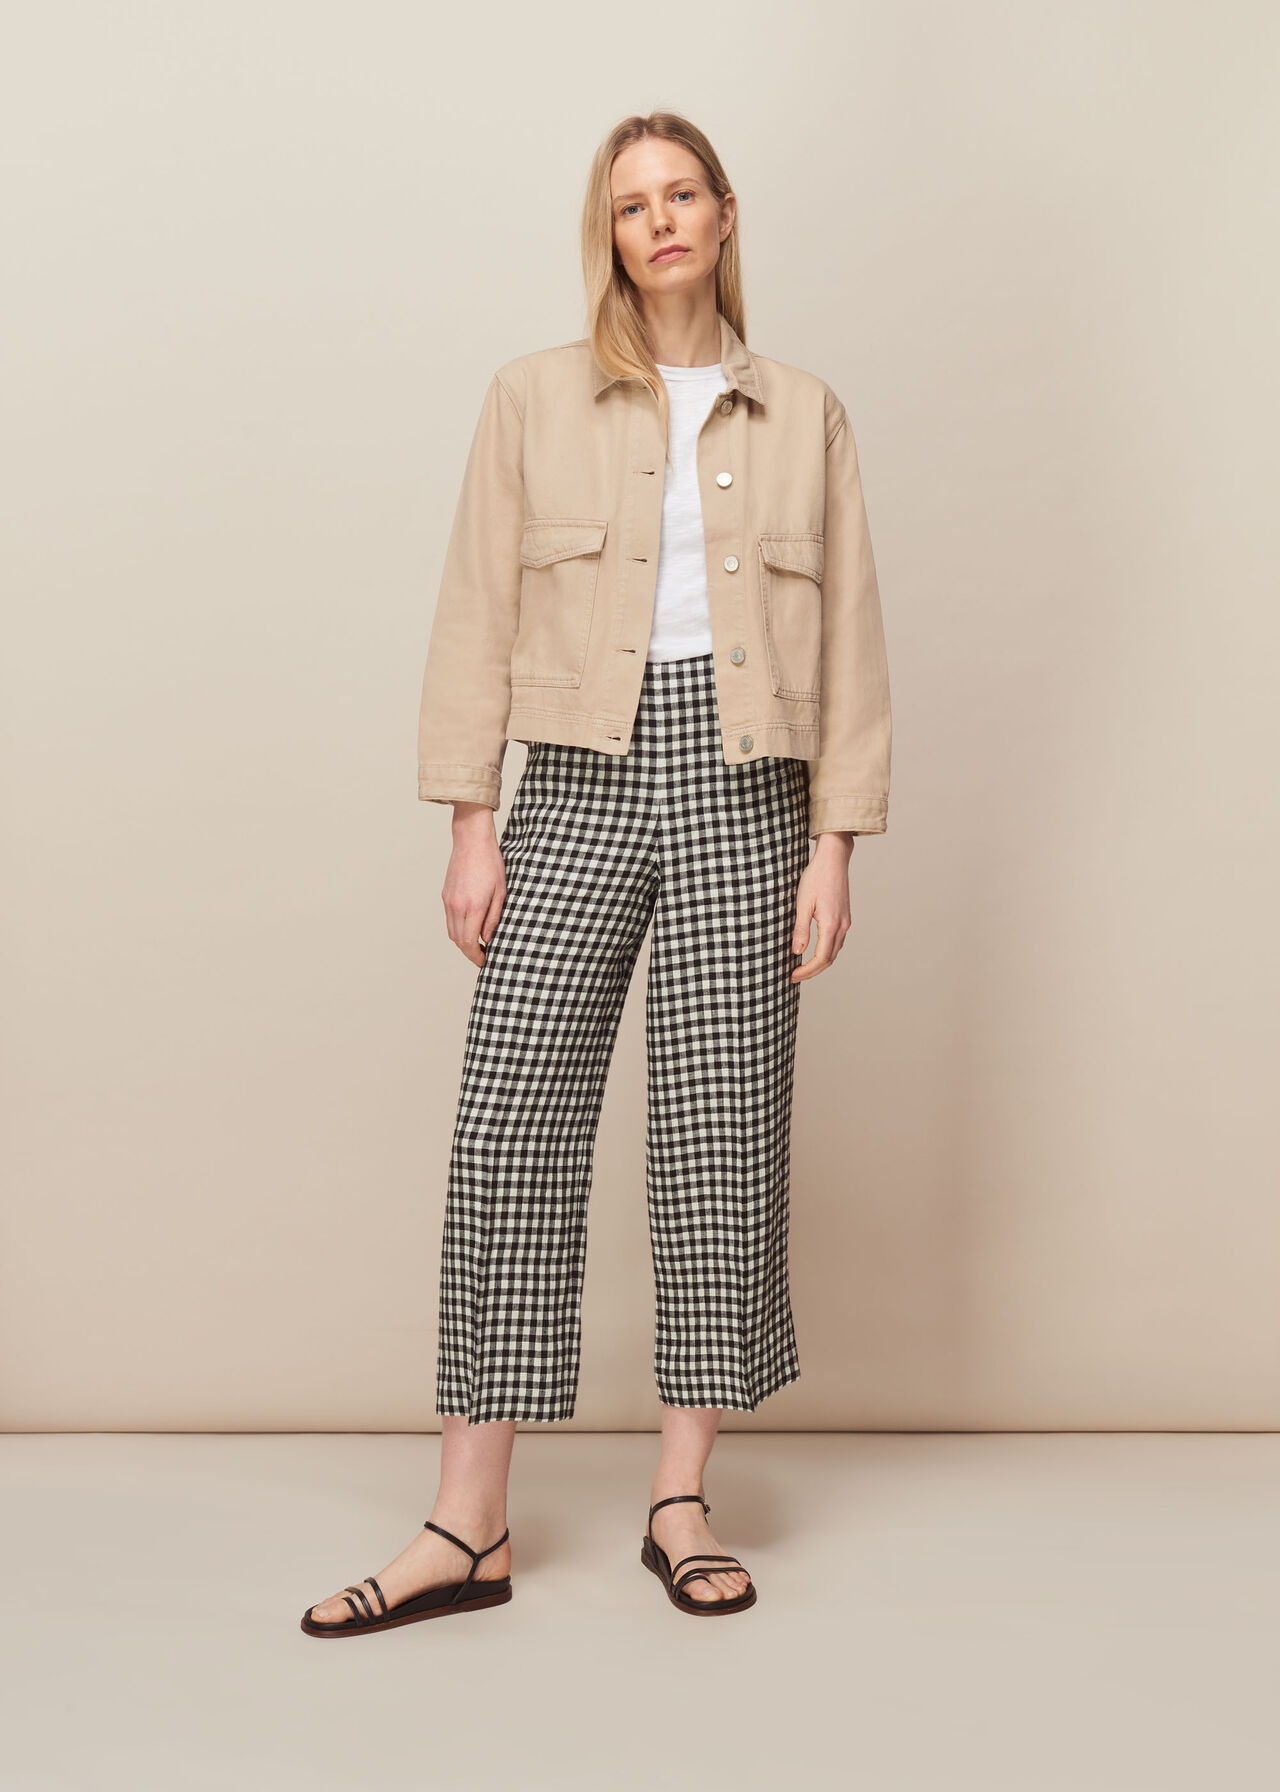 Gingham Linen Cropped Trouser Black and White